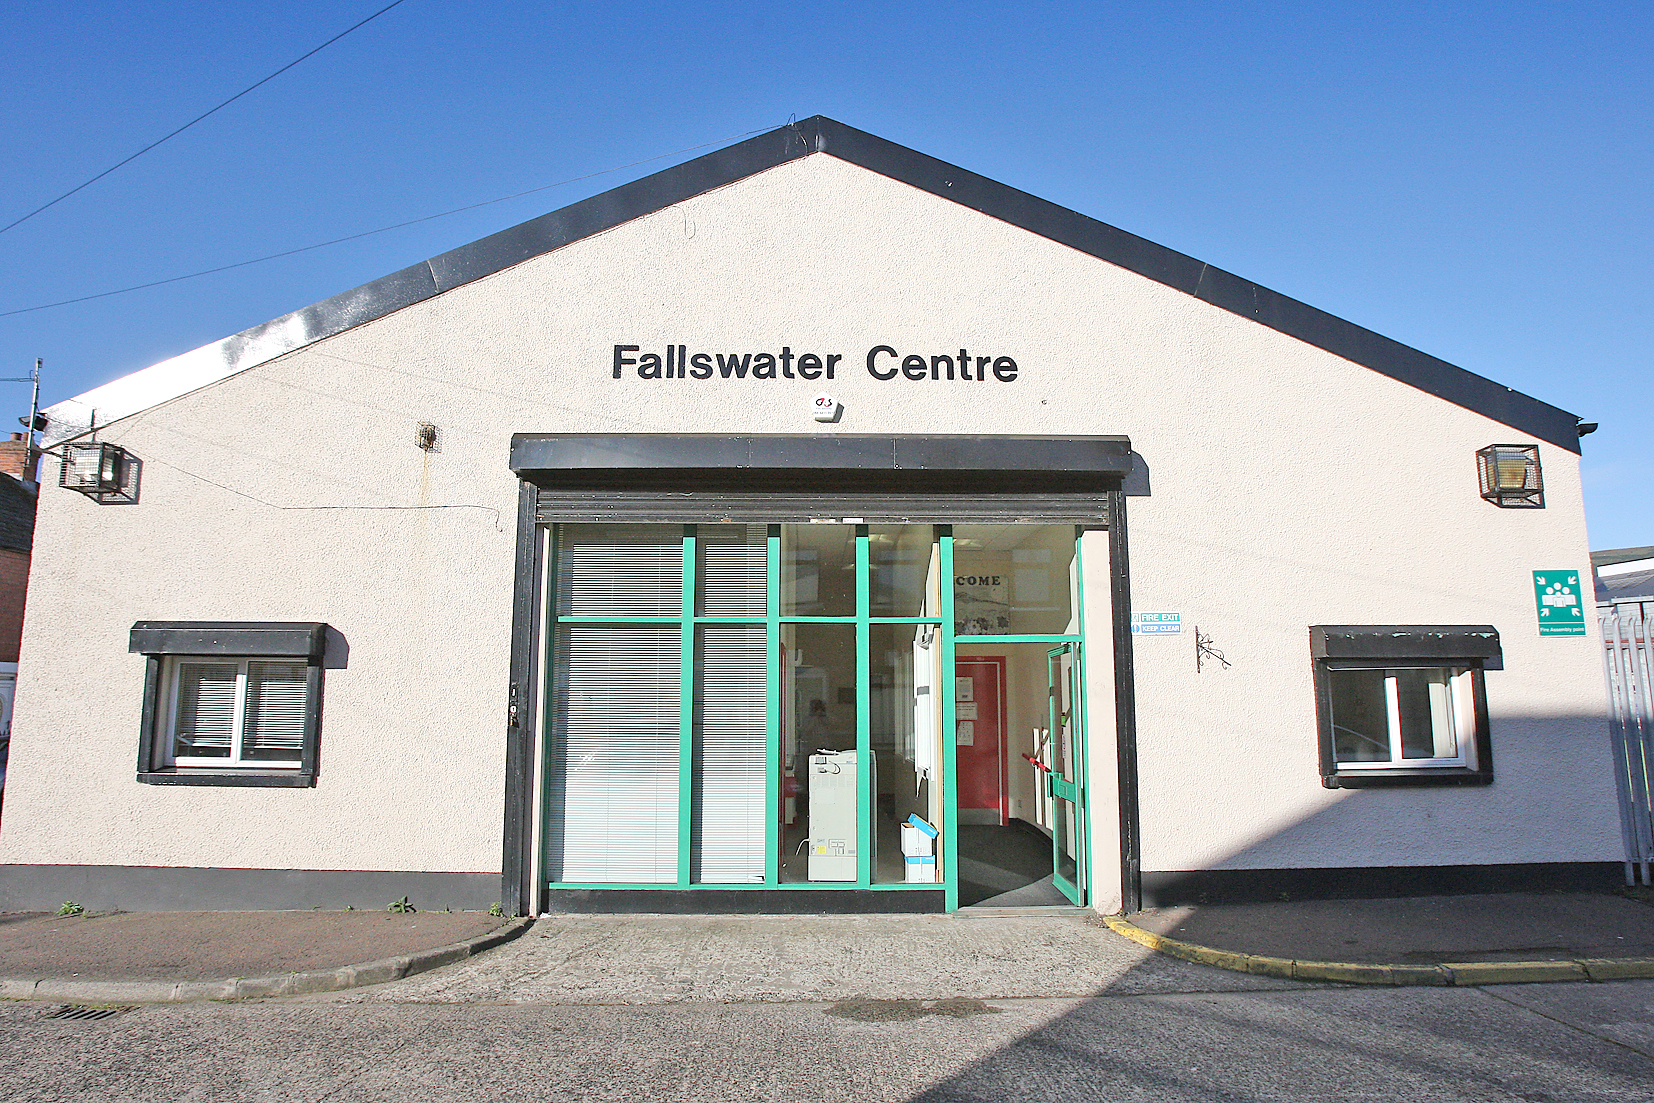 Users are concerned about the future of the Fallswater Day Centre